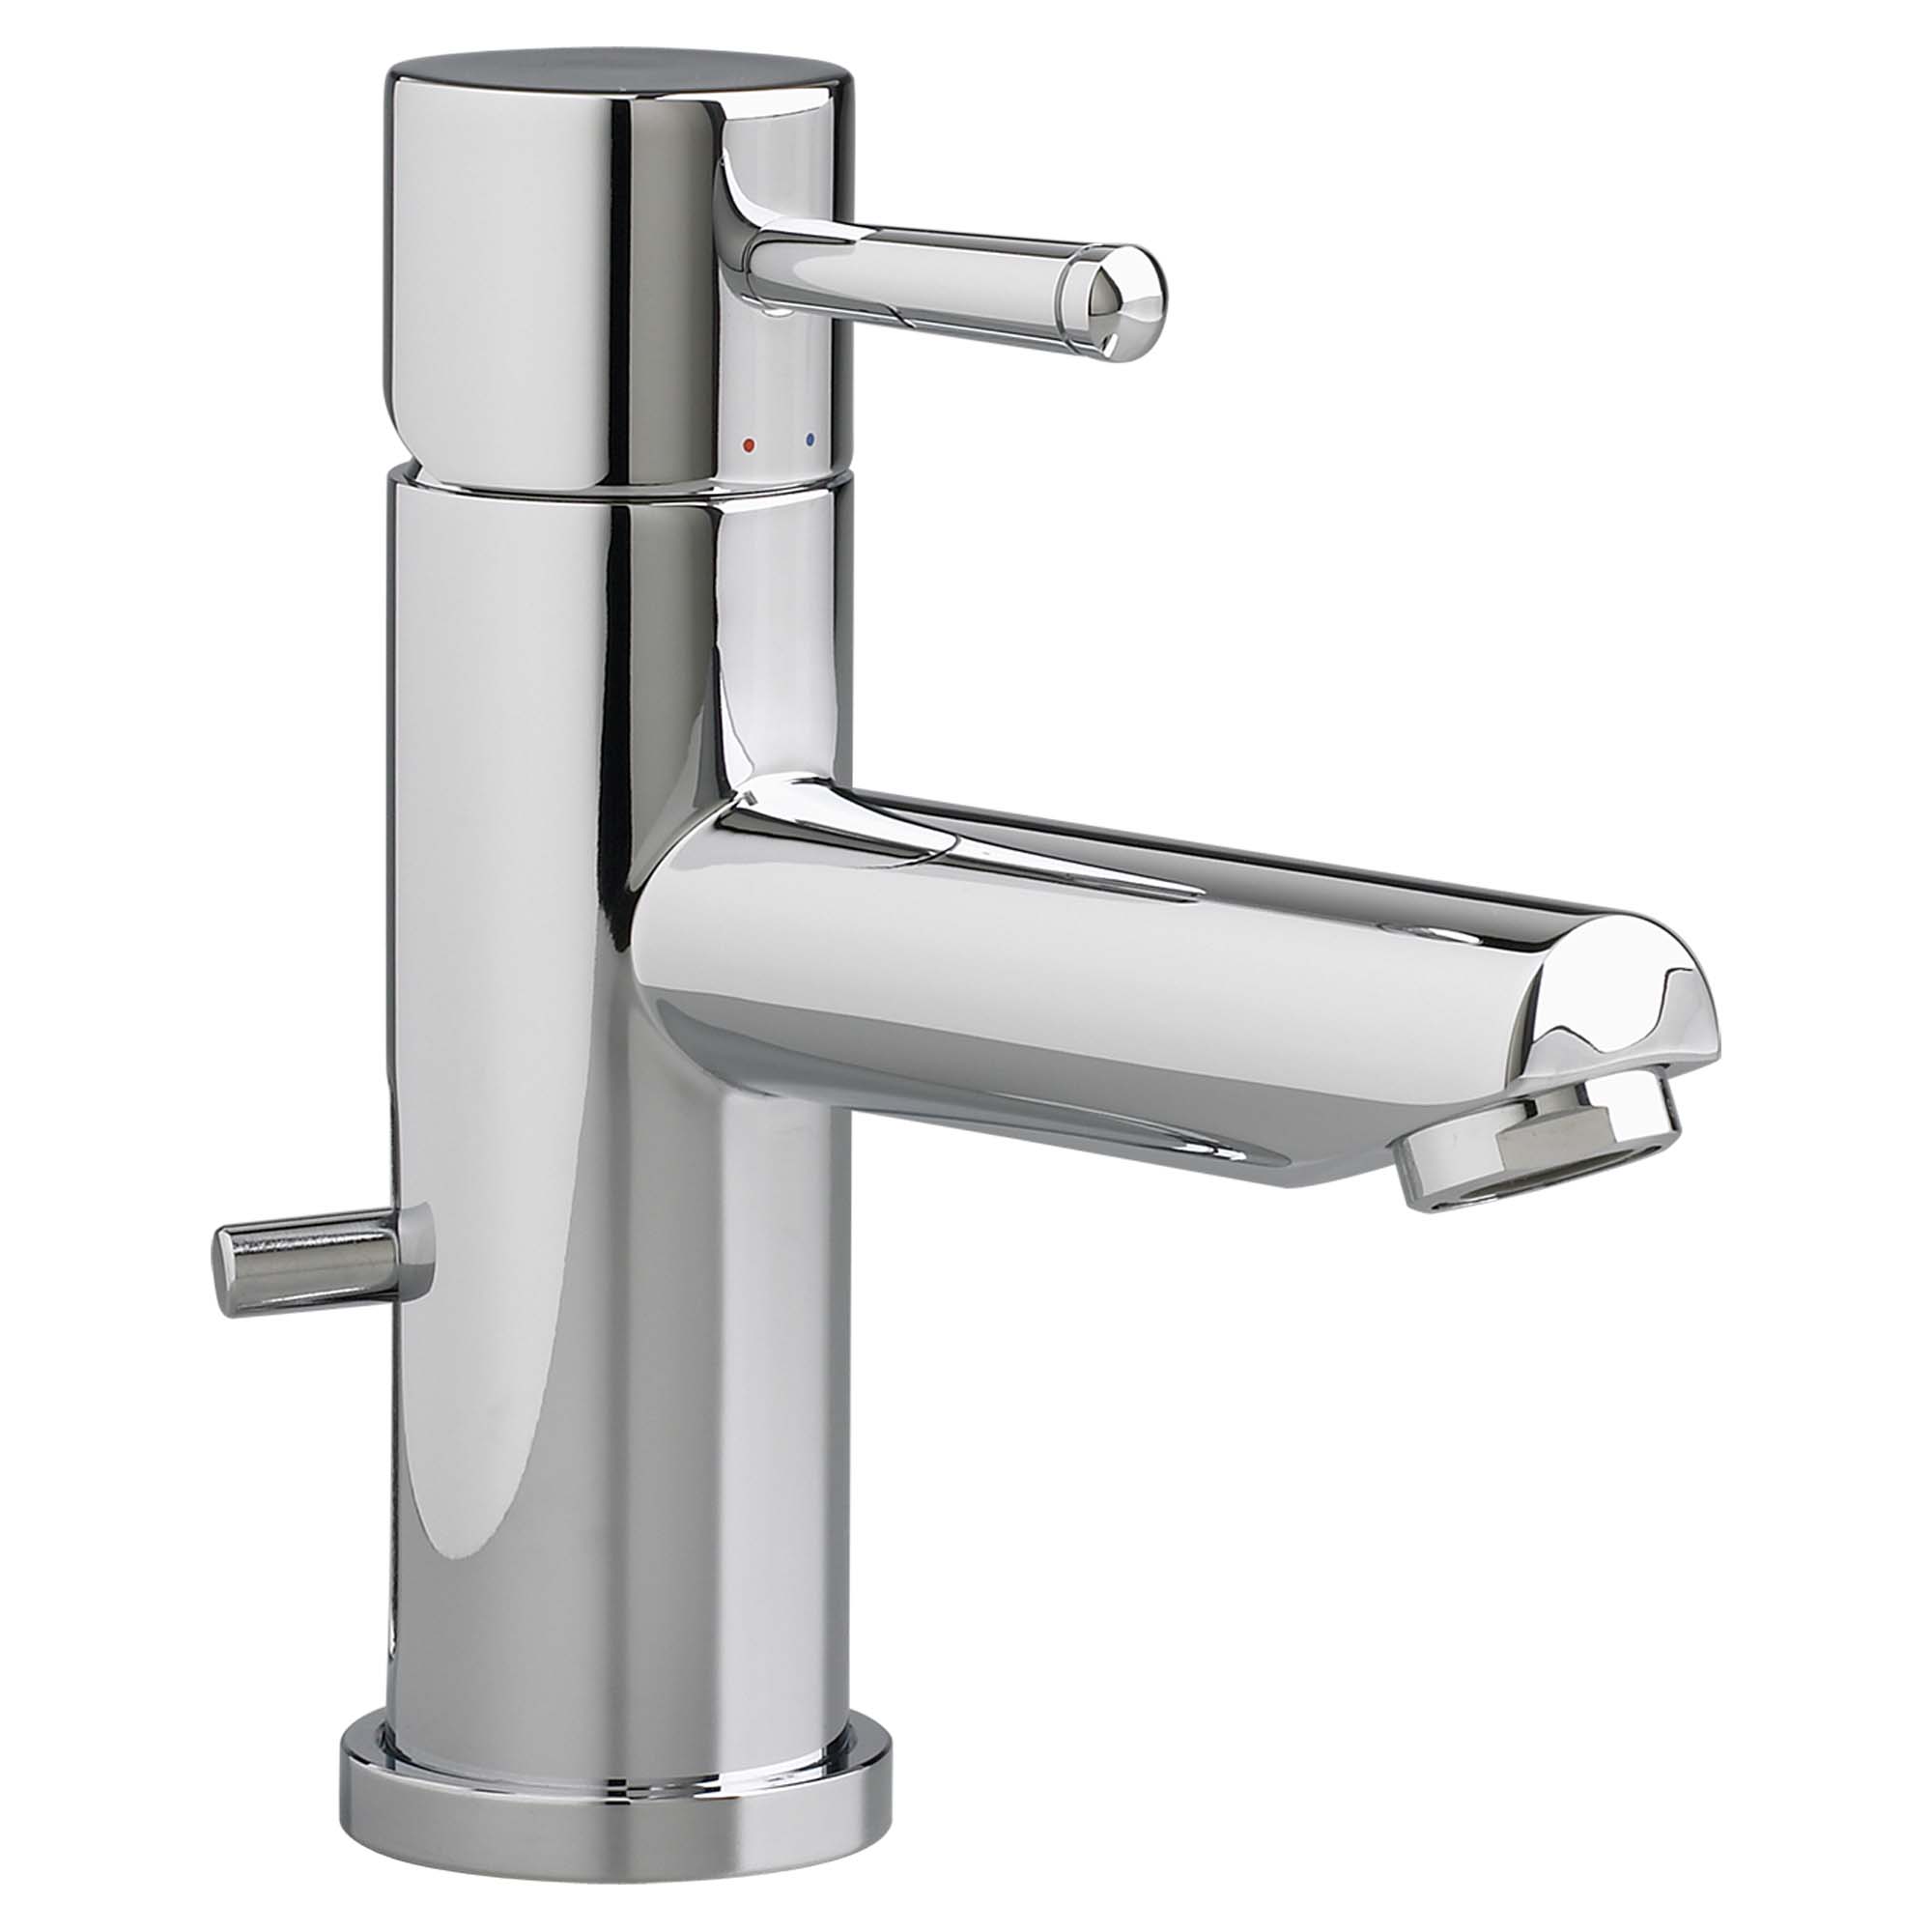 American Standard 2064101.002 Serin® Monoblock Single Control Lavatory Faucet, 1.2 gpm Flow Rate, 3-1/8 in H Spout, 1 Handles, Speed Connect® Pop-Up Drain, 1 Faucet Holes, Polished Chrome, Function: Traditional